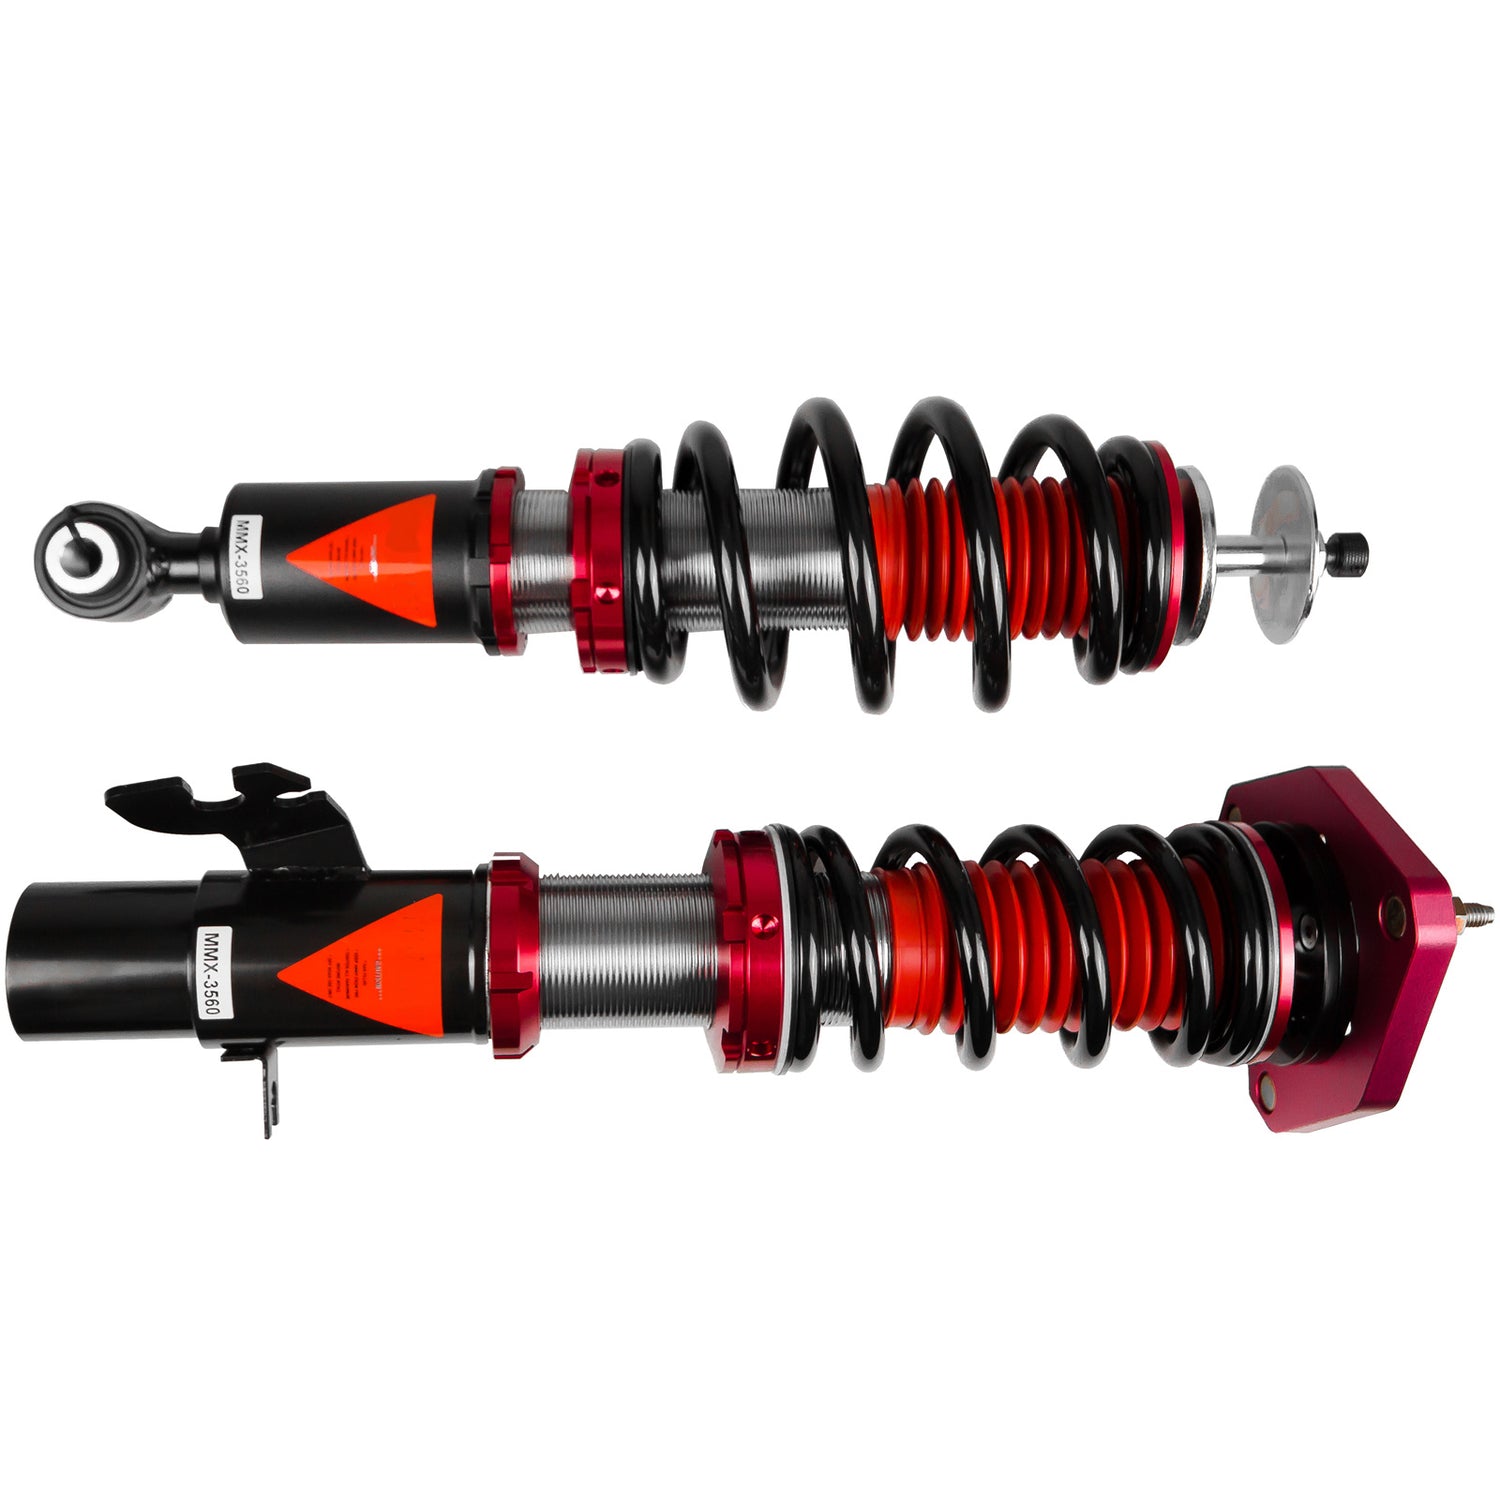 MMX3560 MAXX Coilovers Lowering Kit, Fully Adjustable, Ride Height, 40 Clicks Rebound Settings, MINI Clubman(R55) 07-14